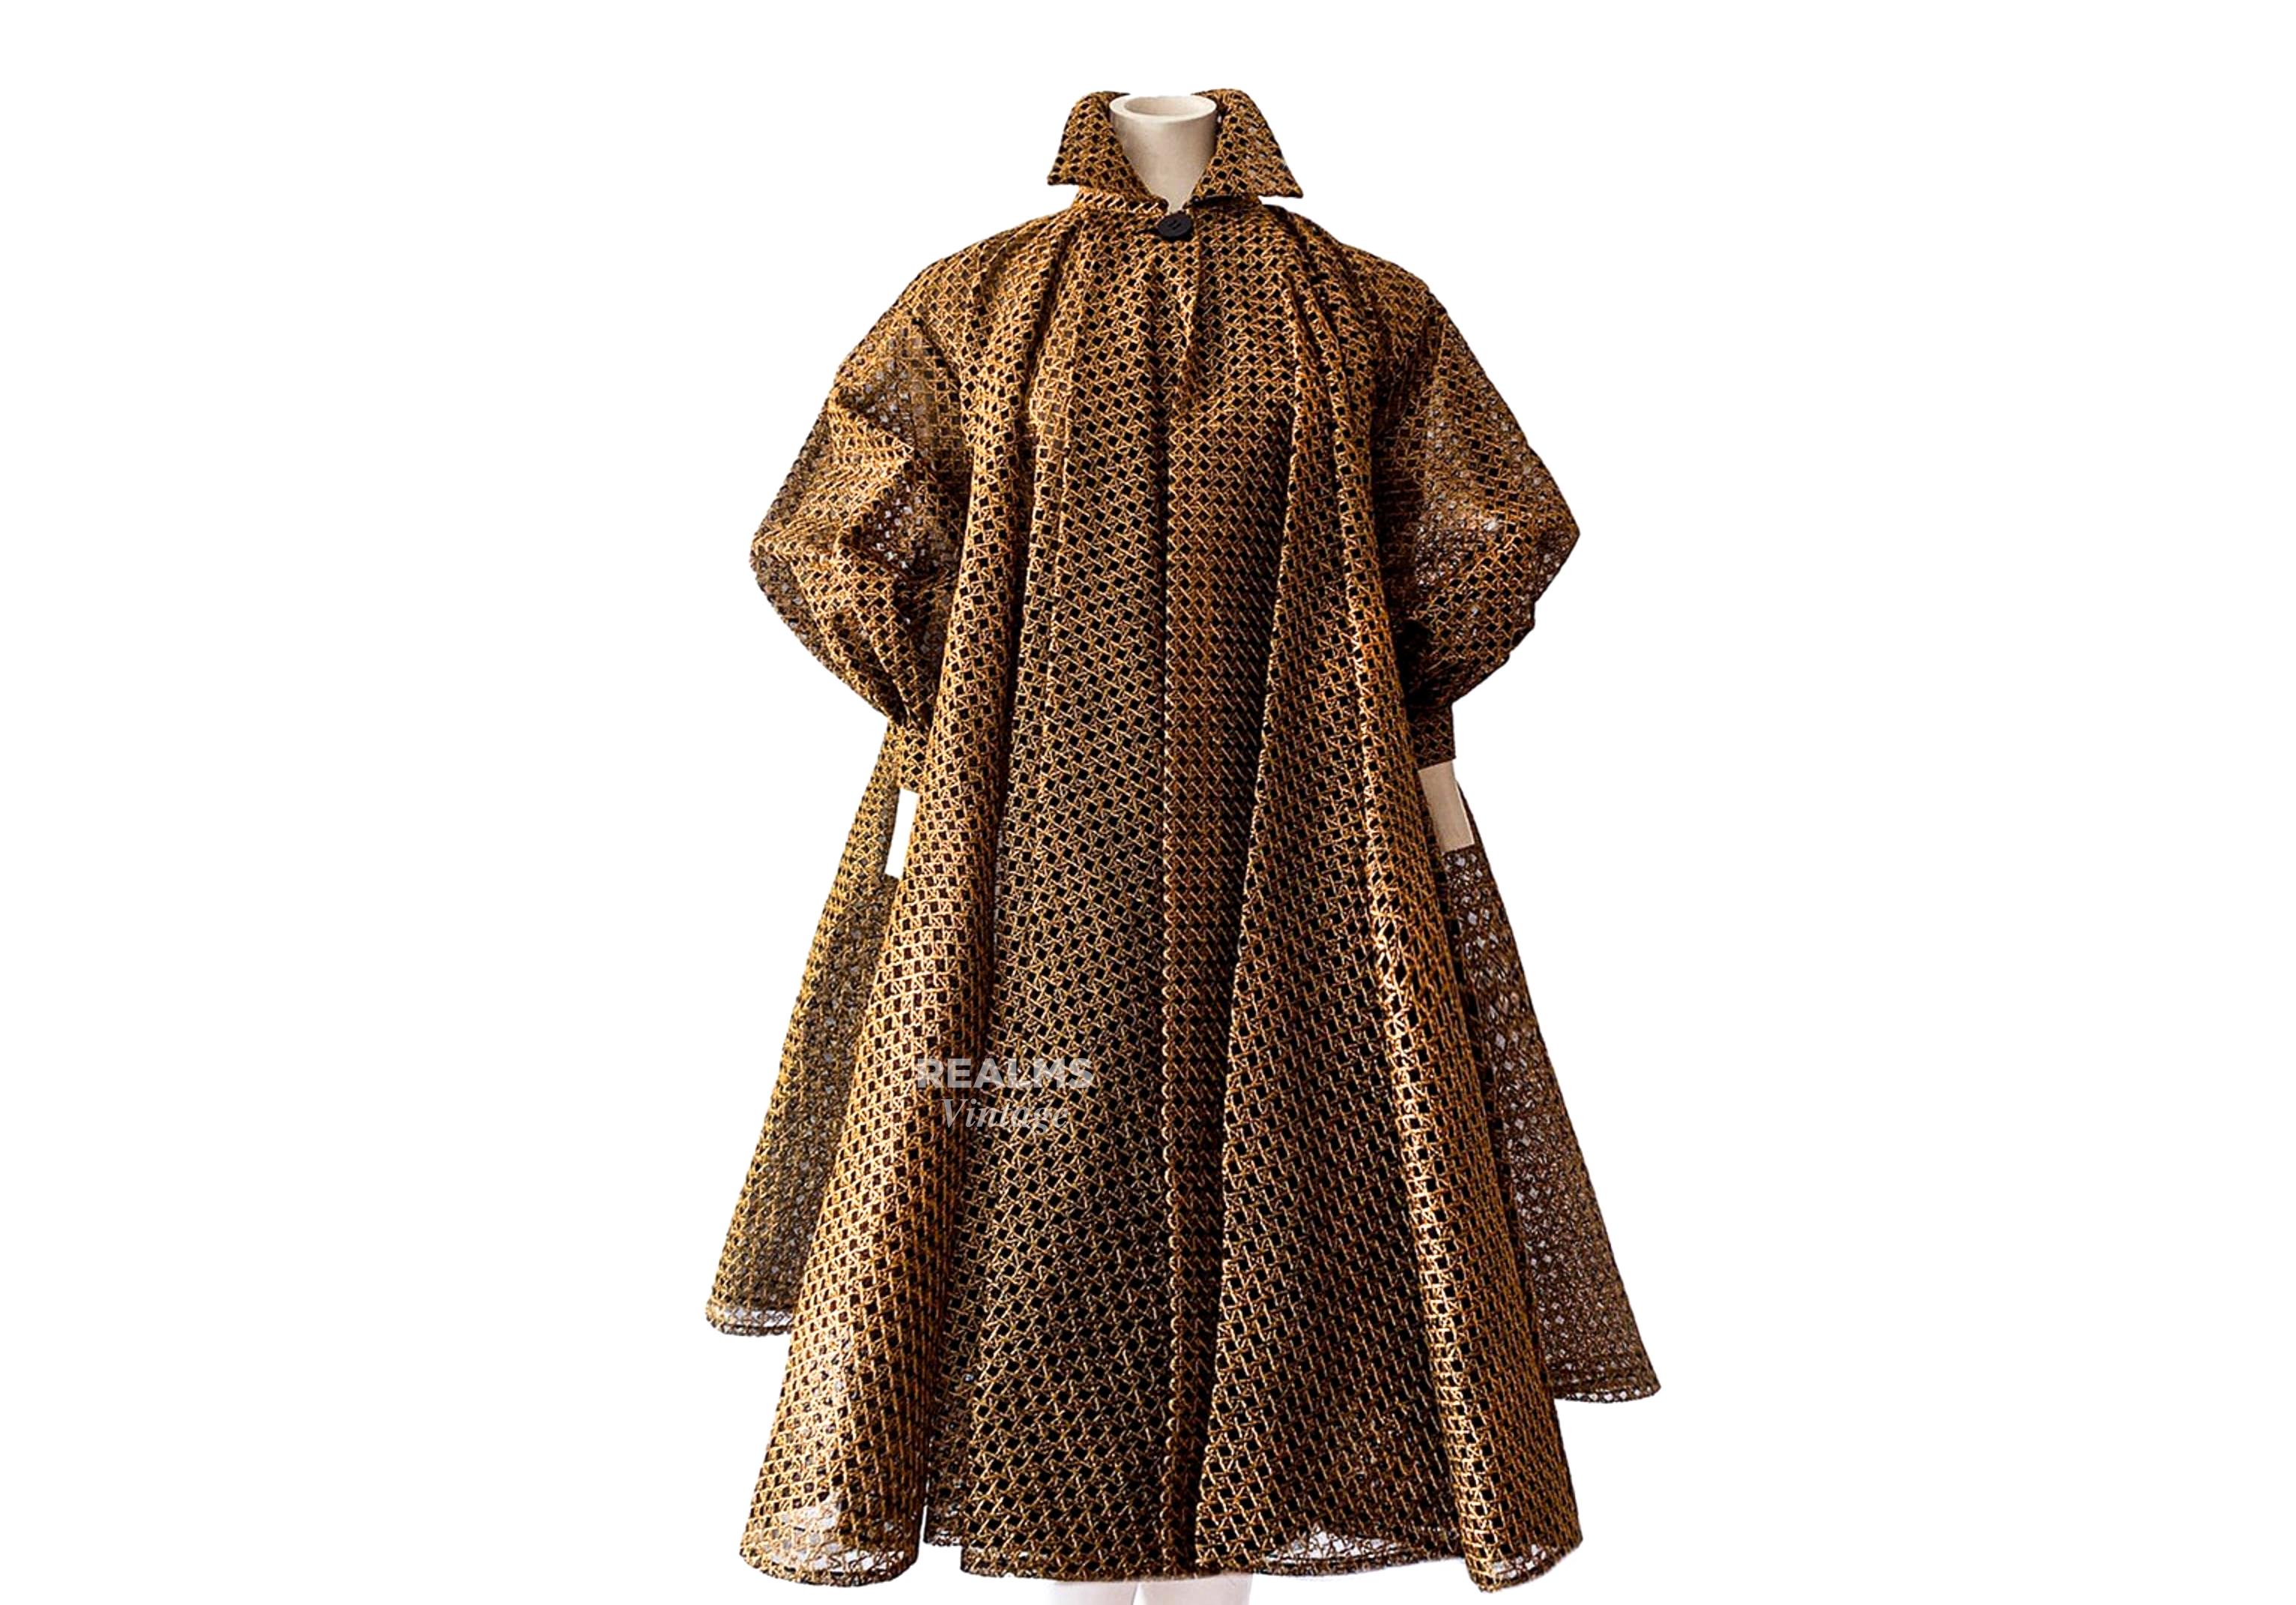 CHRISTIAN DIOR Archival SS 1991 - Spectaculaire robe manteau swing overcoat  en vente 4